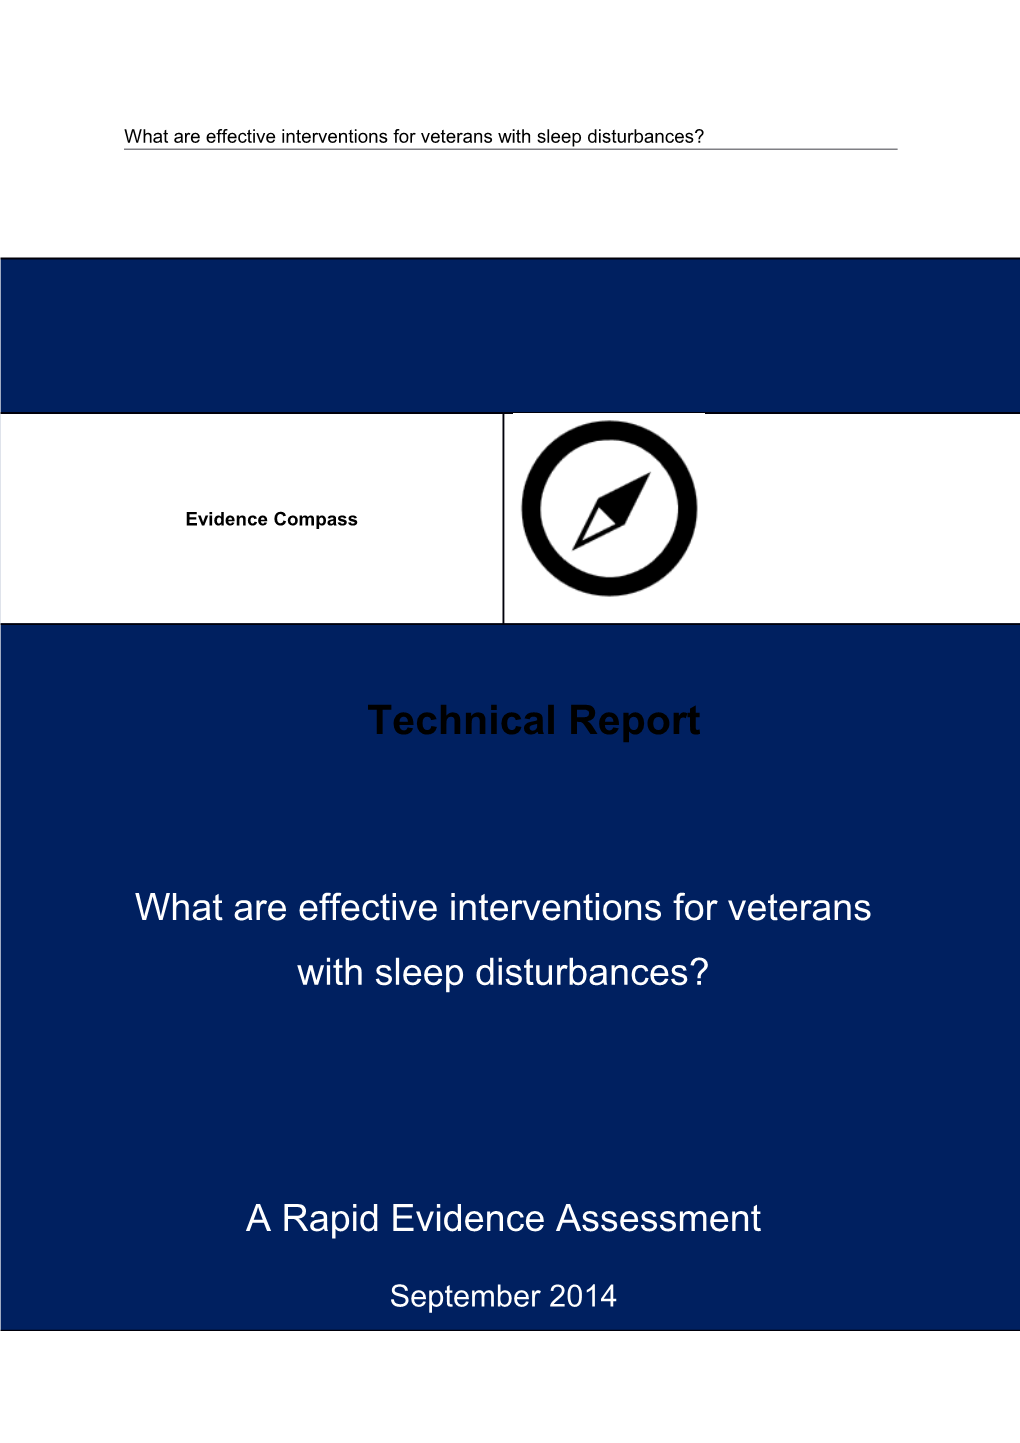 What Are Effective Interventions for Veterans with Sleep Disturbances?